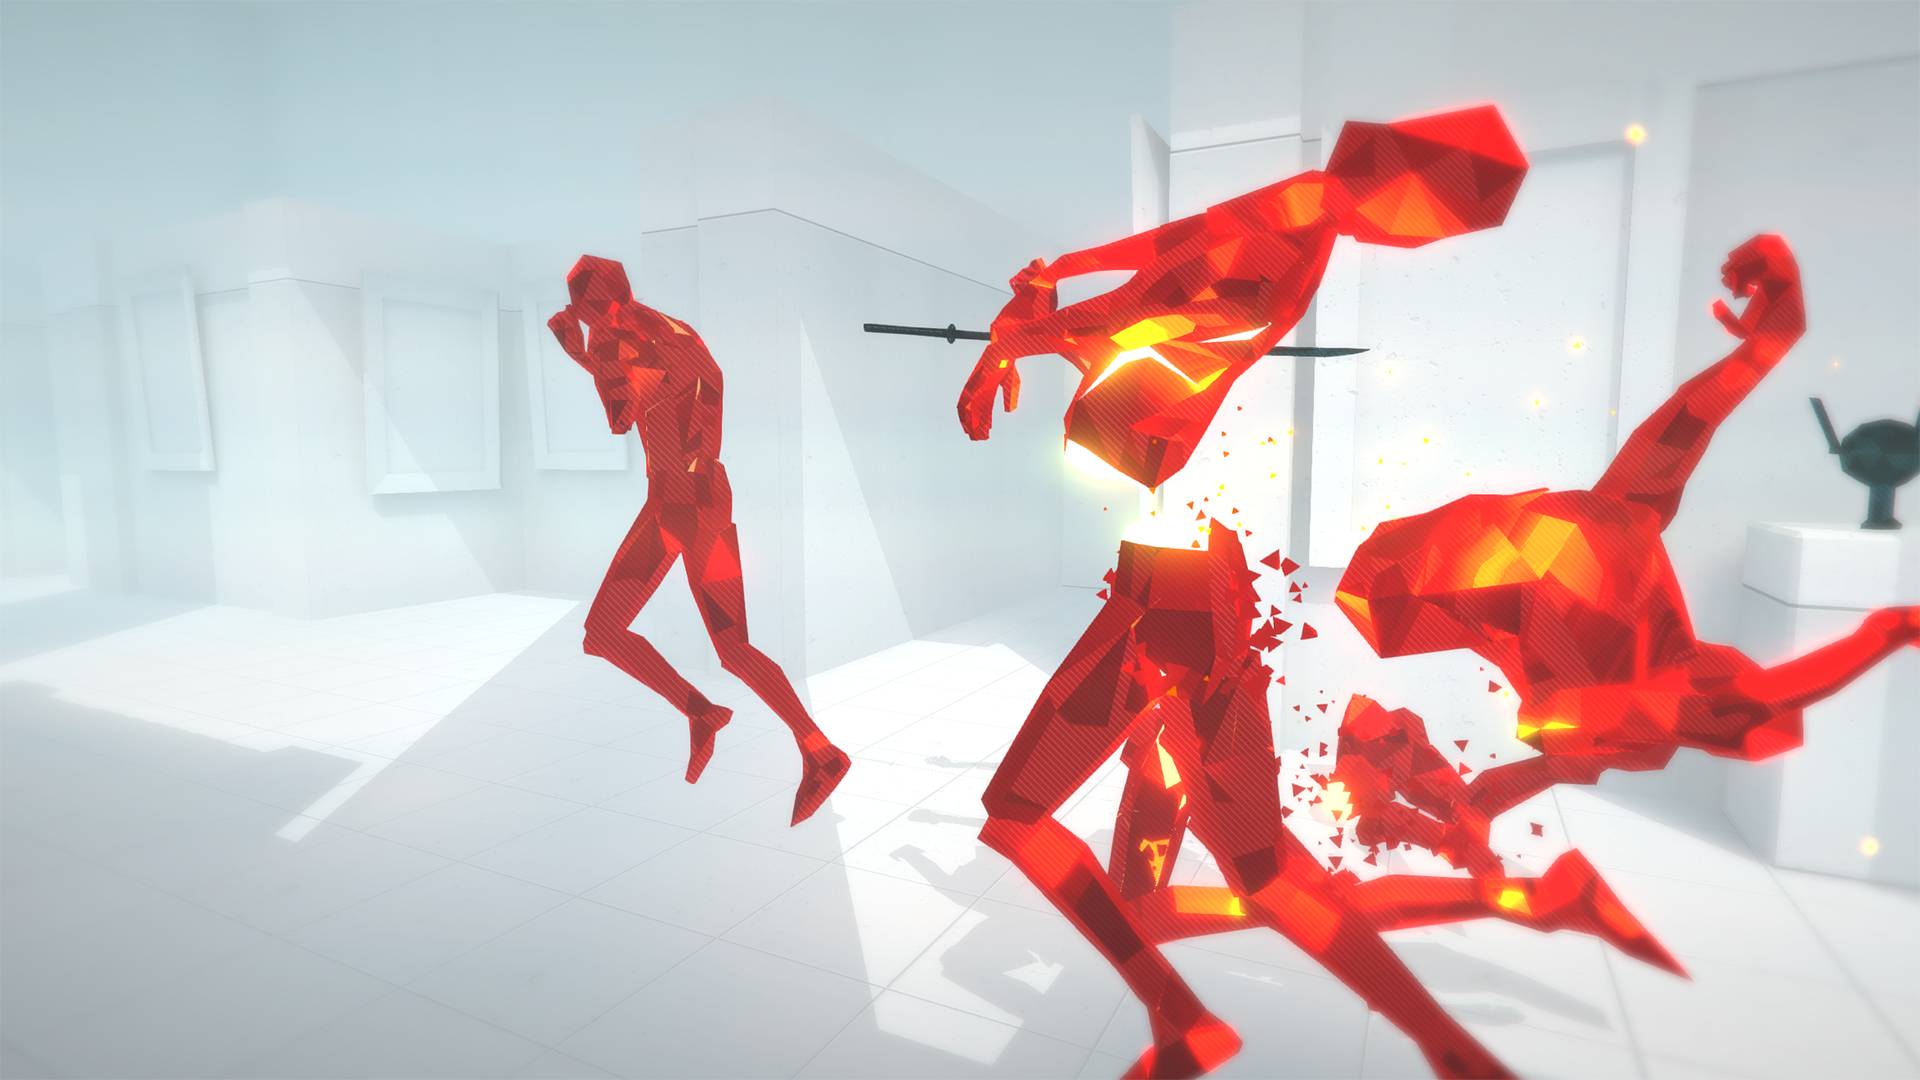 A red humanoid figure falling apart, with another raising a gun in the background